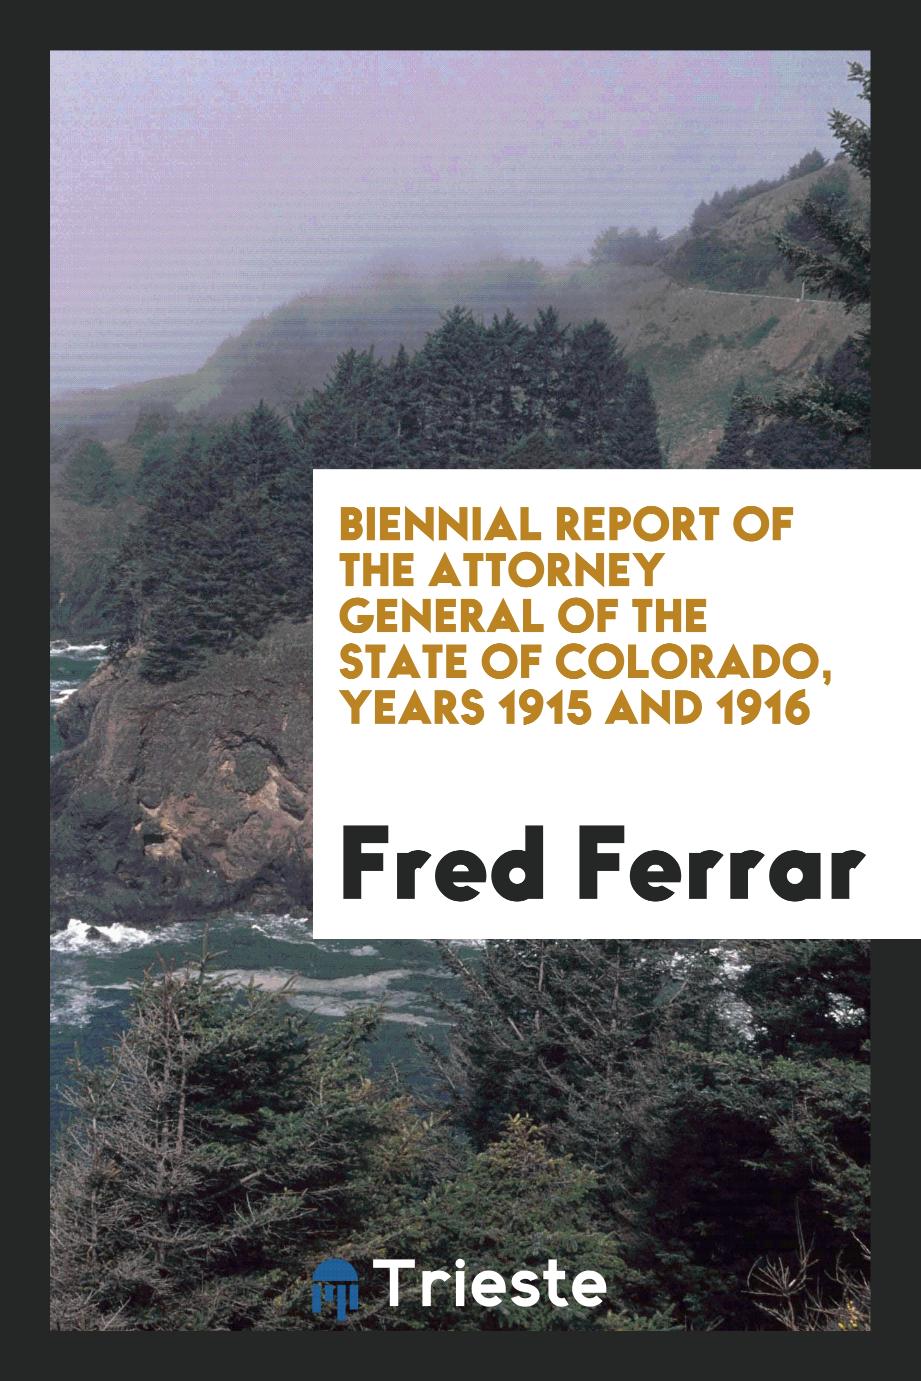 Biennial Report of the Attorney General of the State of Colorado, Years 1915 and 1916